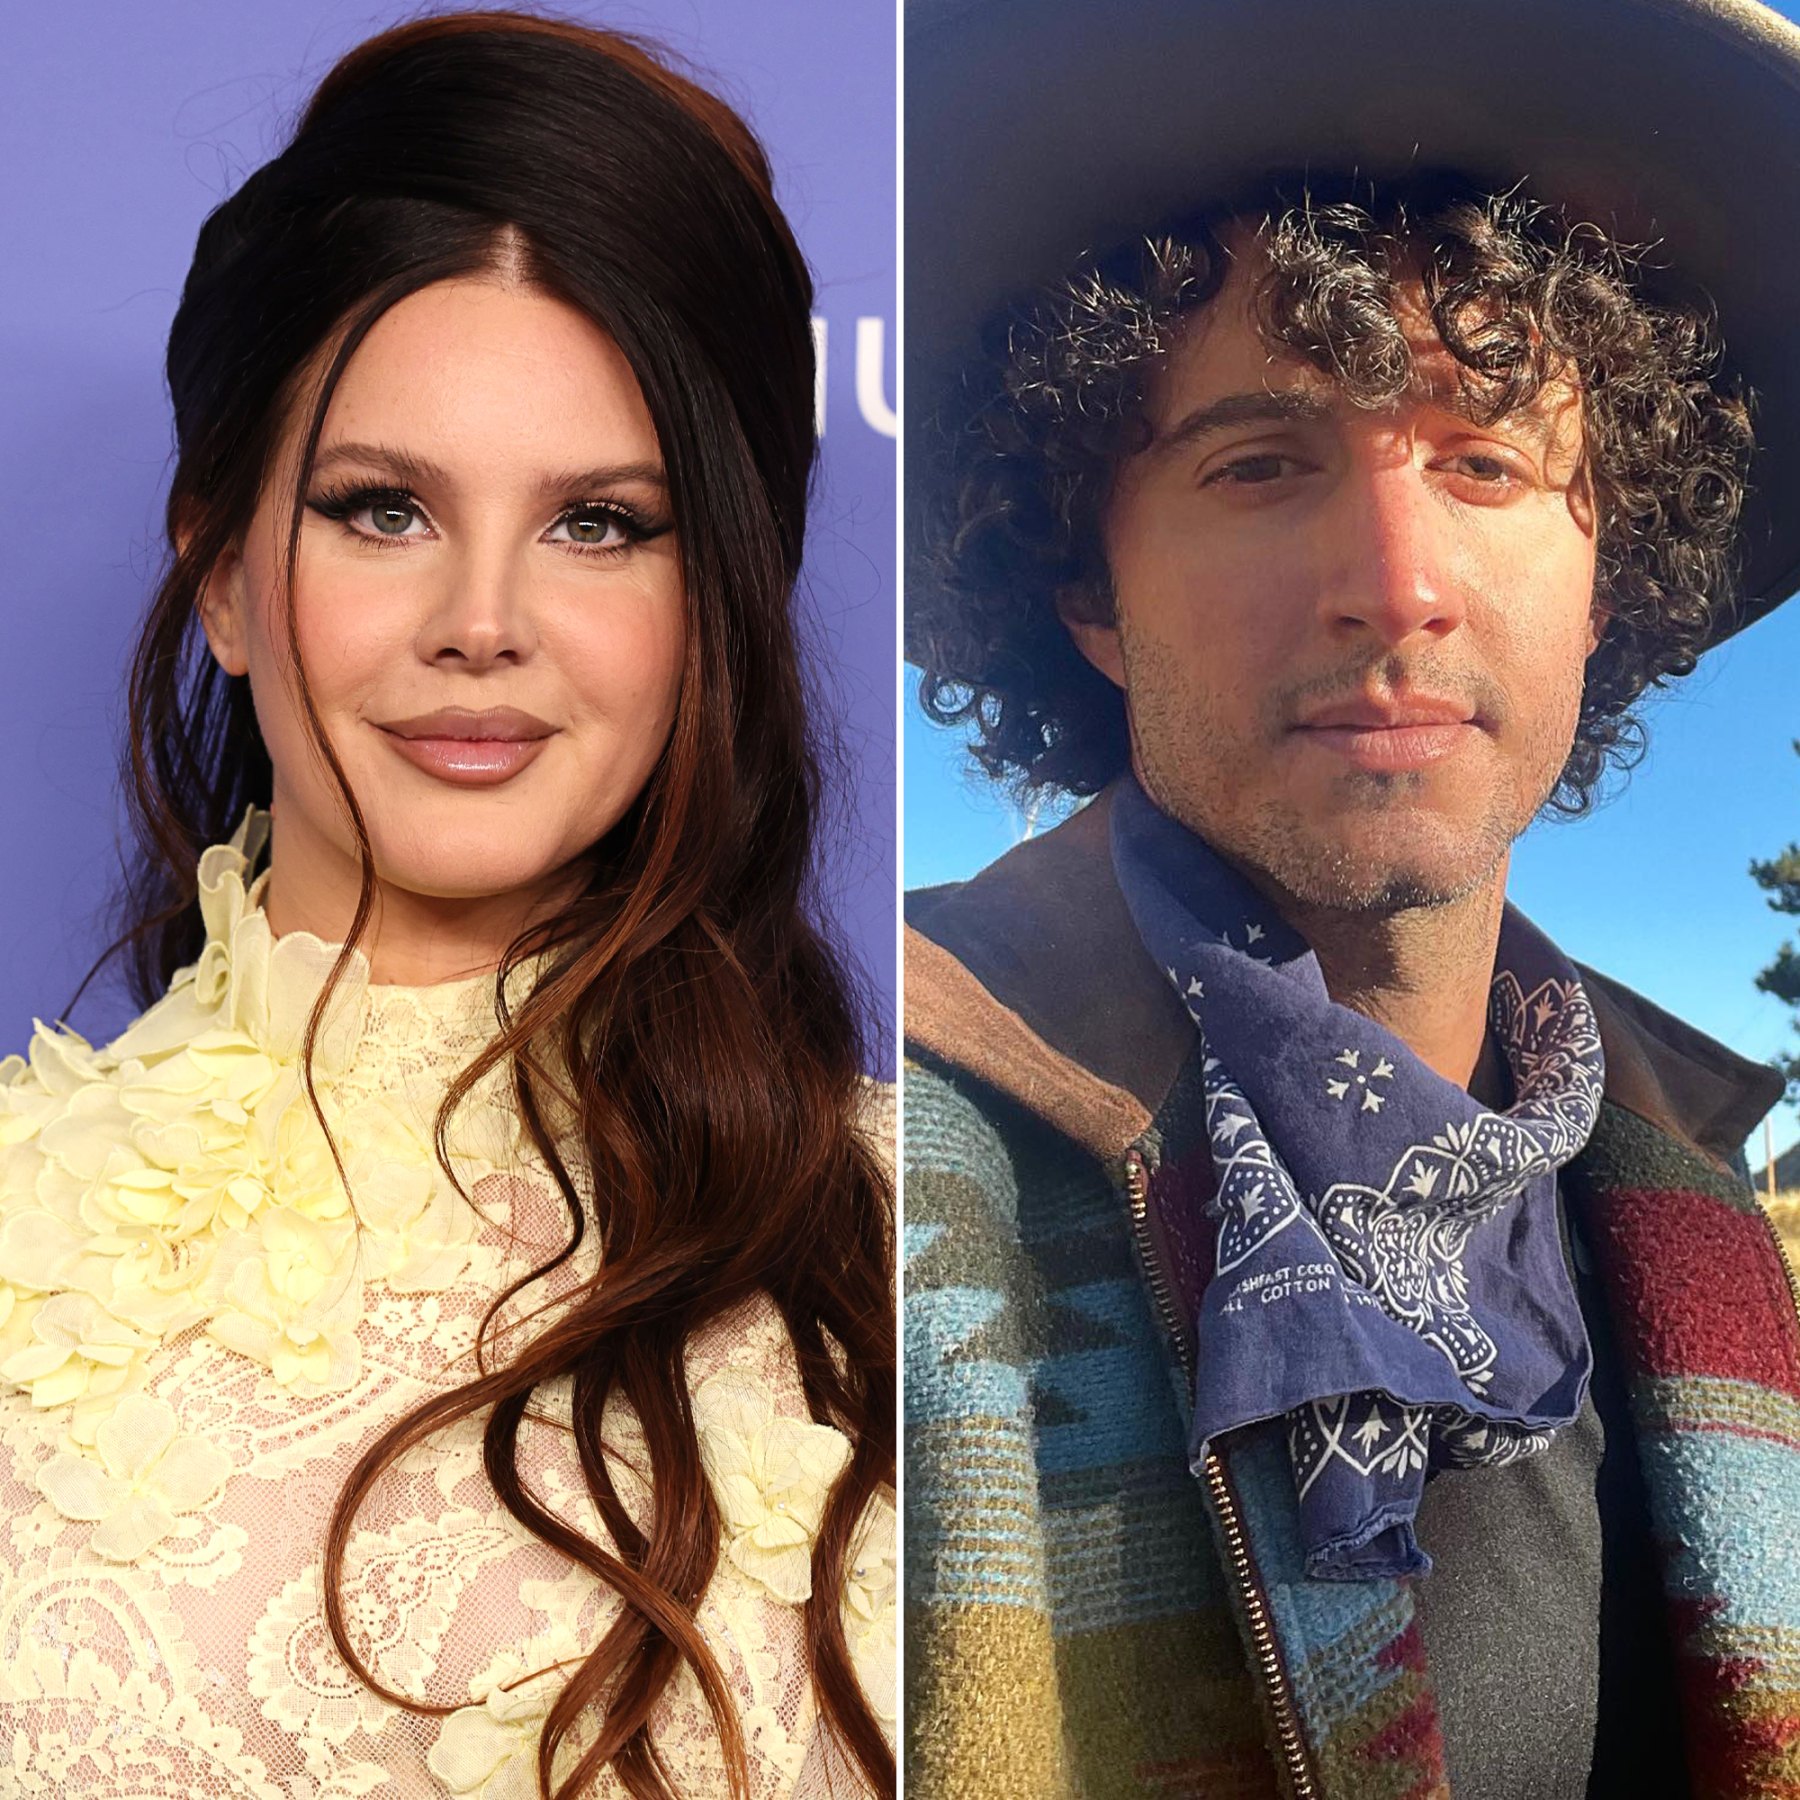 Lana Del Rey Is Engaged to Music Manager Evan Winiker Details UsWeekly